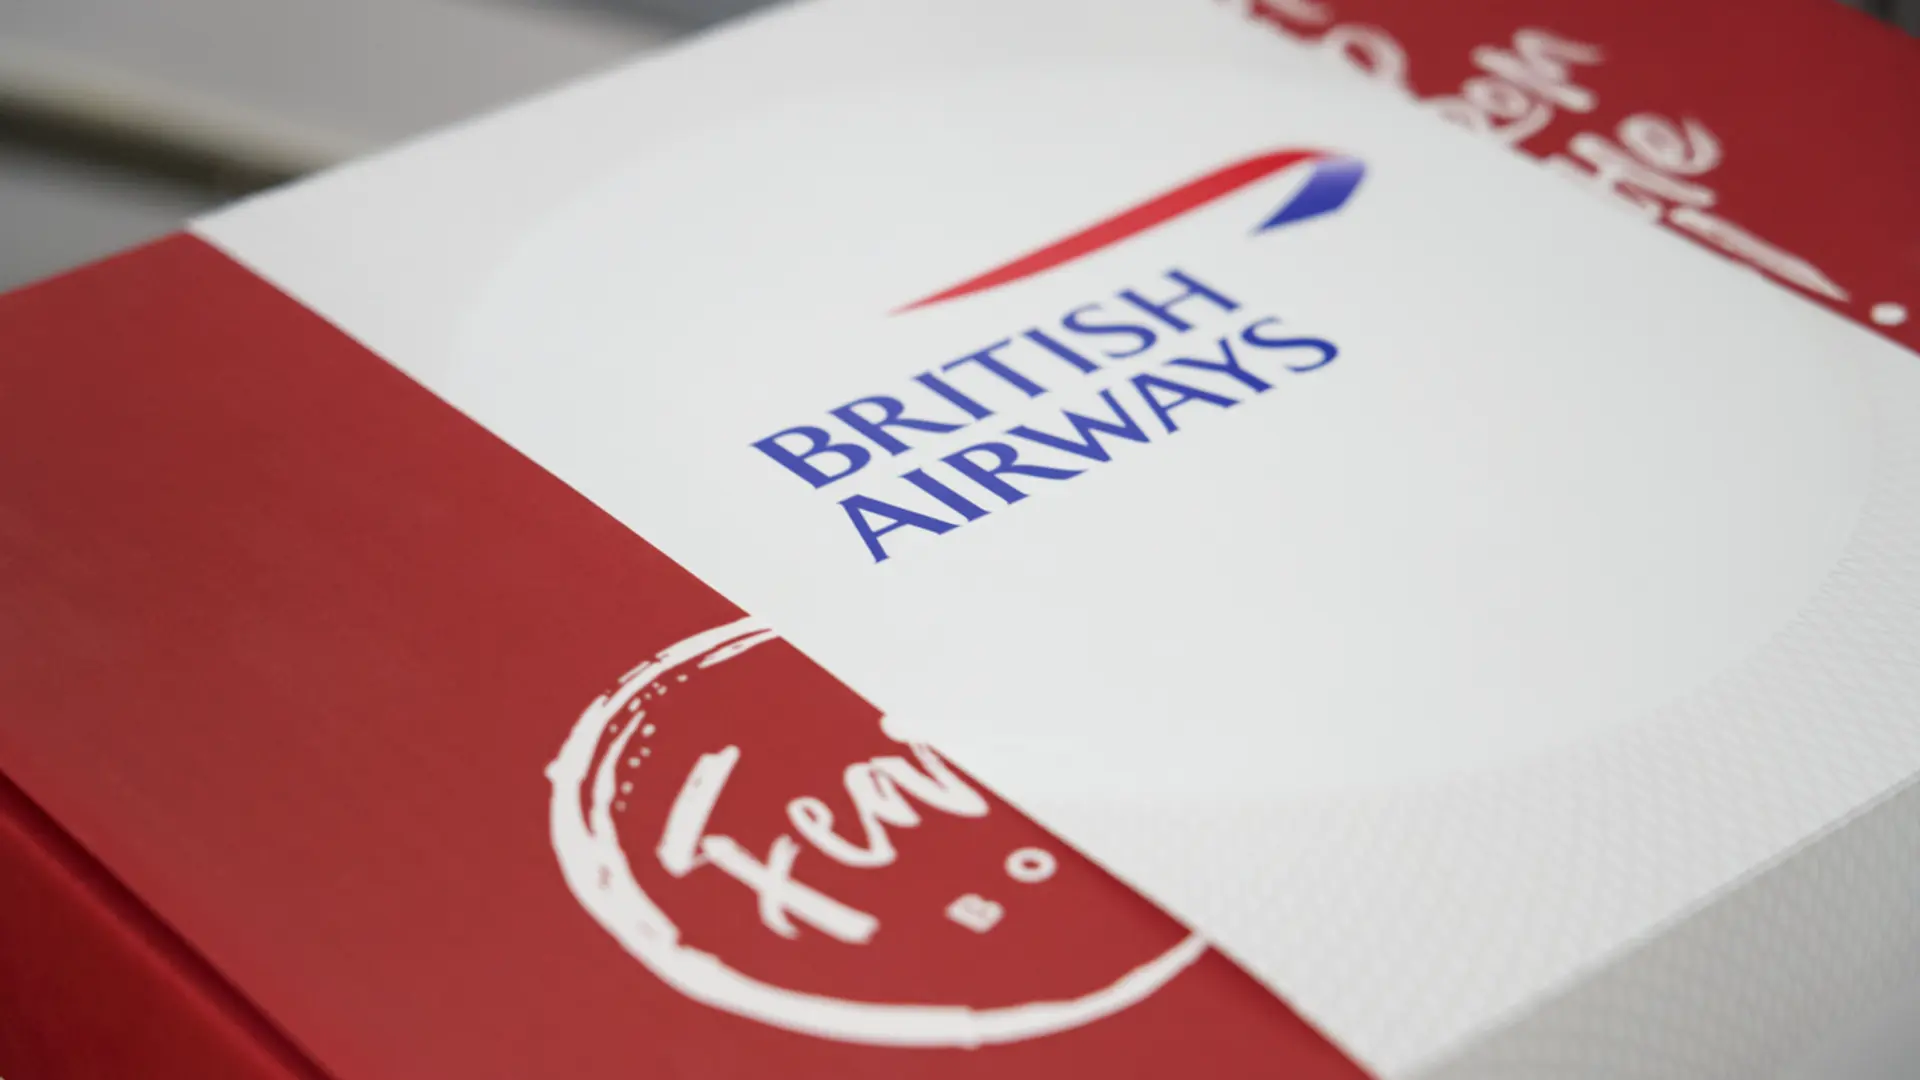 Airlines News - British Airways Now Offers First Class Dining At Home, With A Catch ...